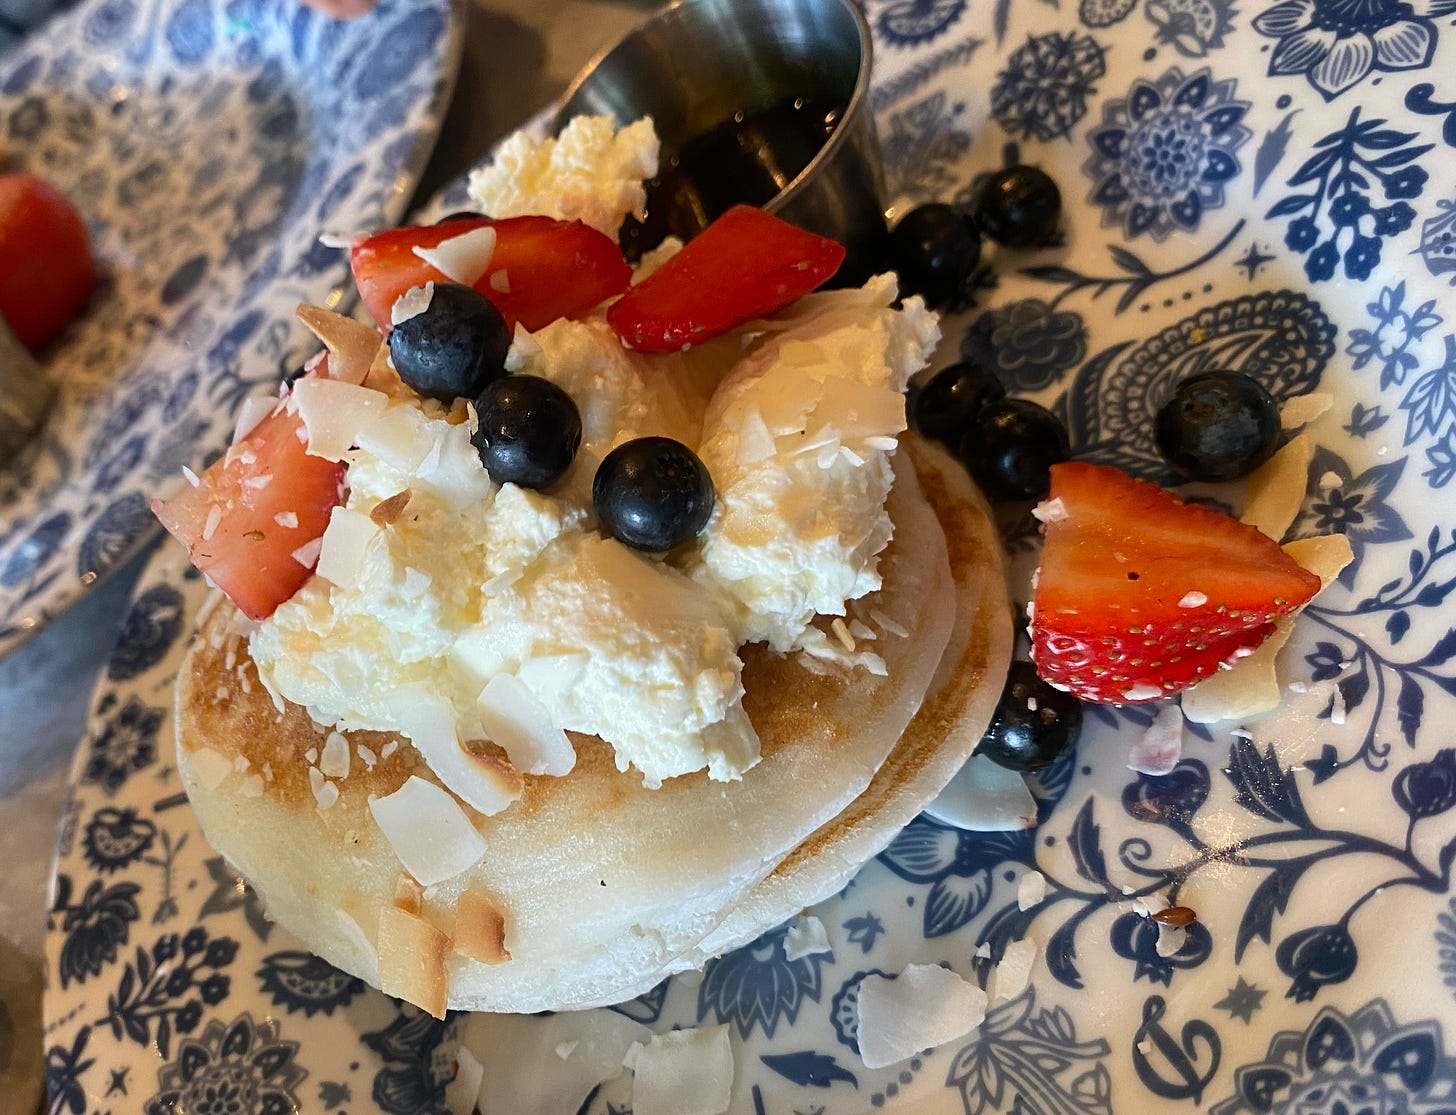 A plate of pancakes topped with blueberries, strawberries, syrup, shrikhand, all on a white porcelain plate with blue designs. There is a metal container for sauce.